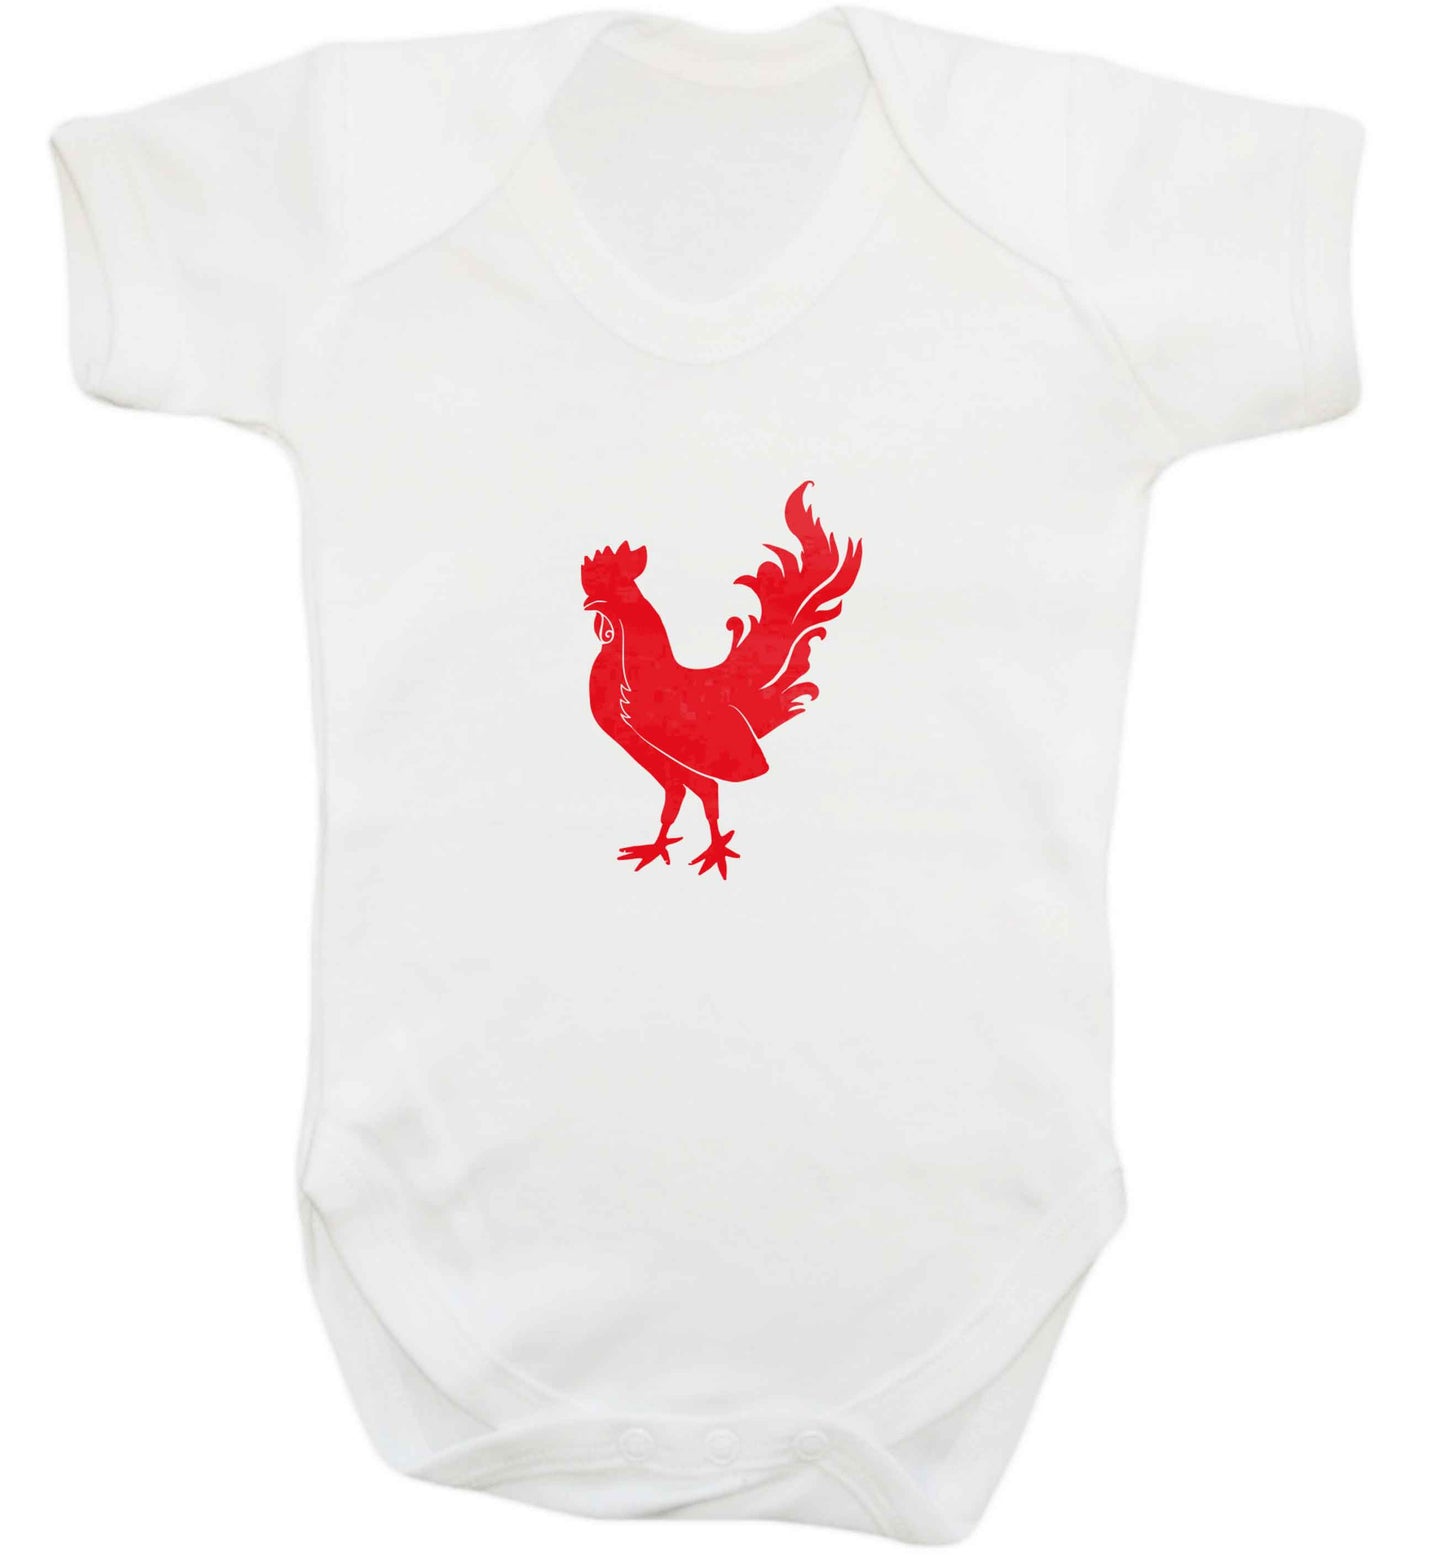 Rooster baby vest white 18-24 months